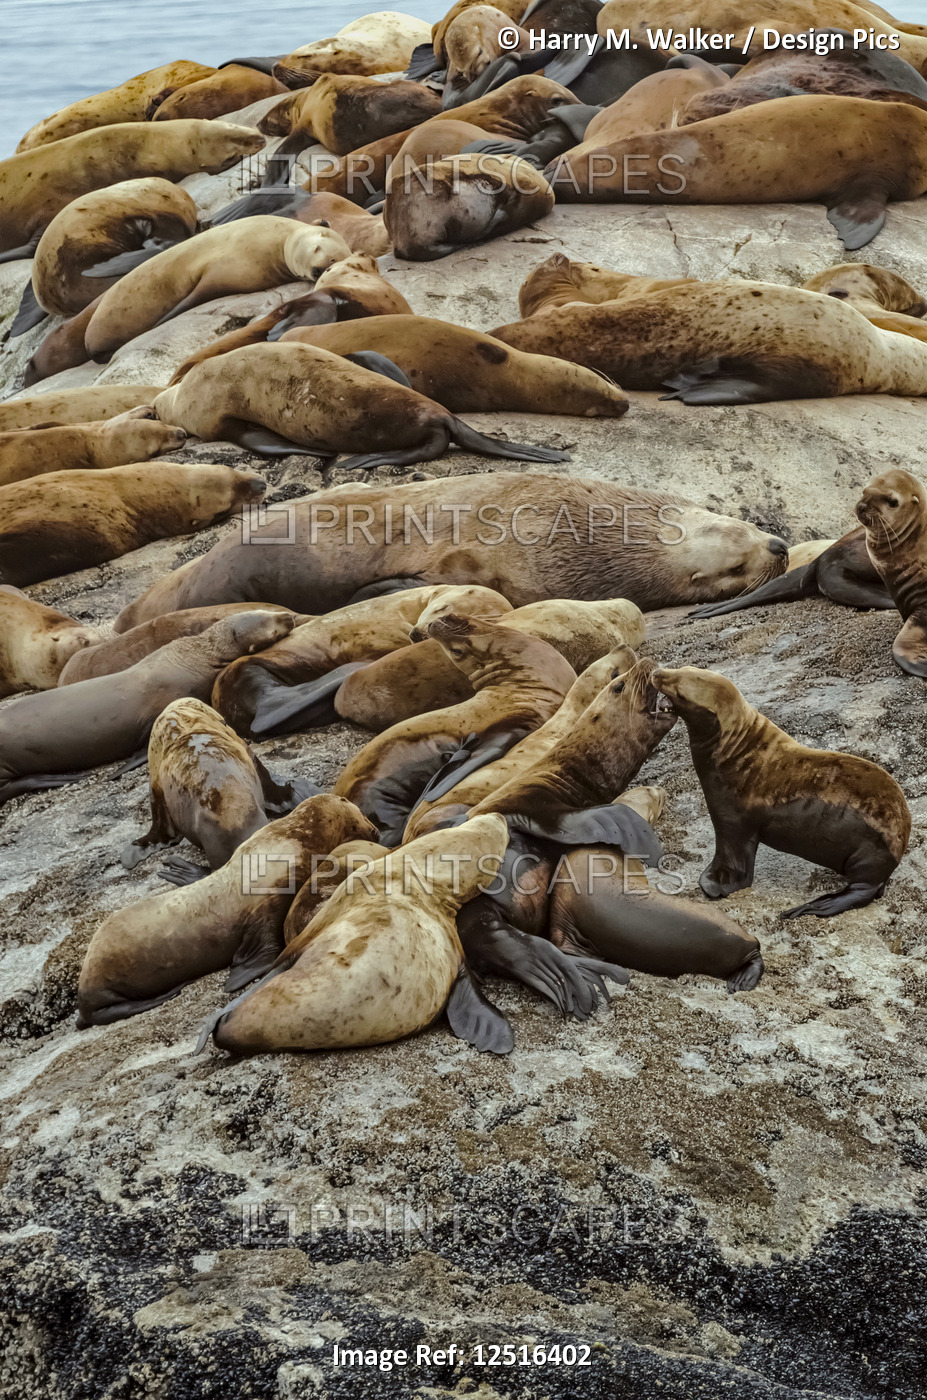 Steller sea lions (Eumetopias jubatus) hauled out on rocks at South Marble ...